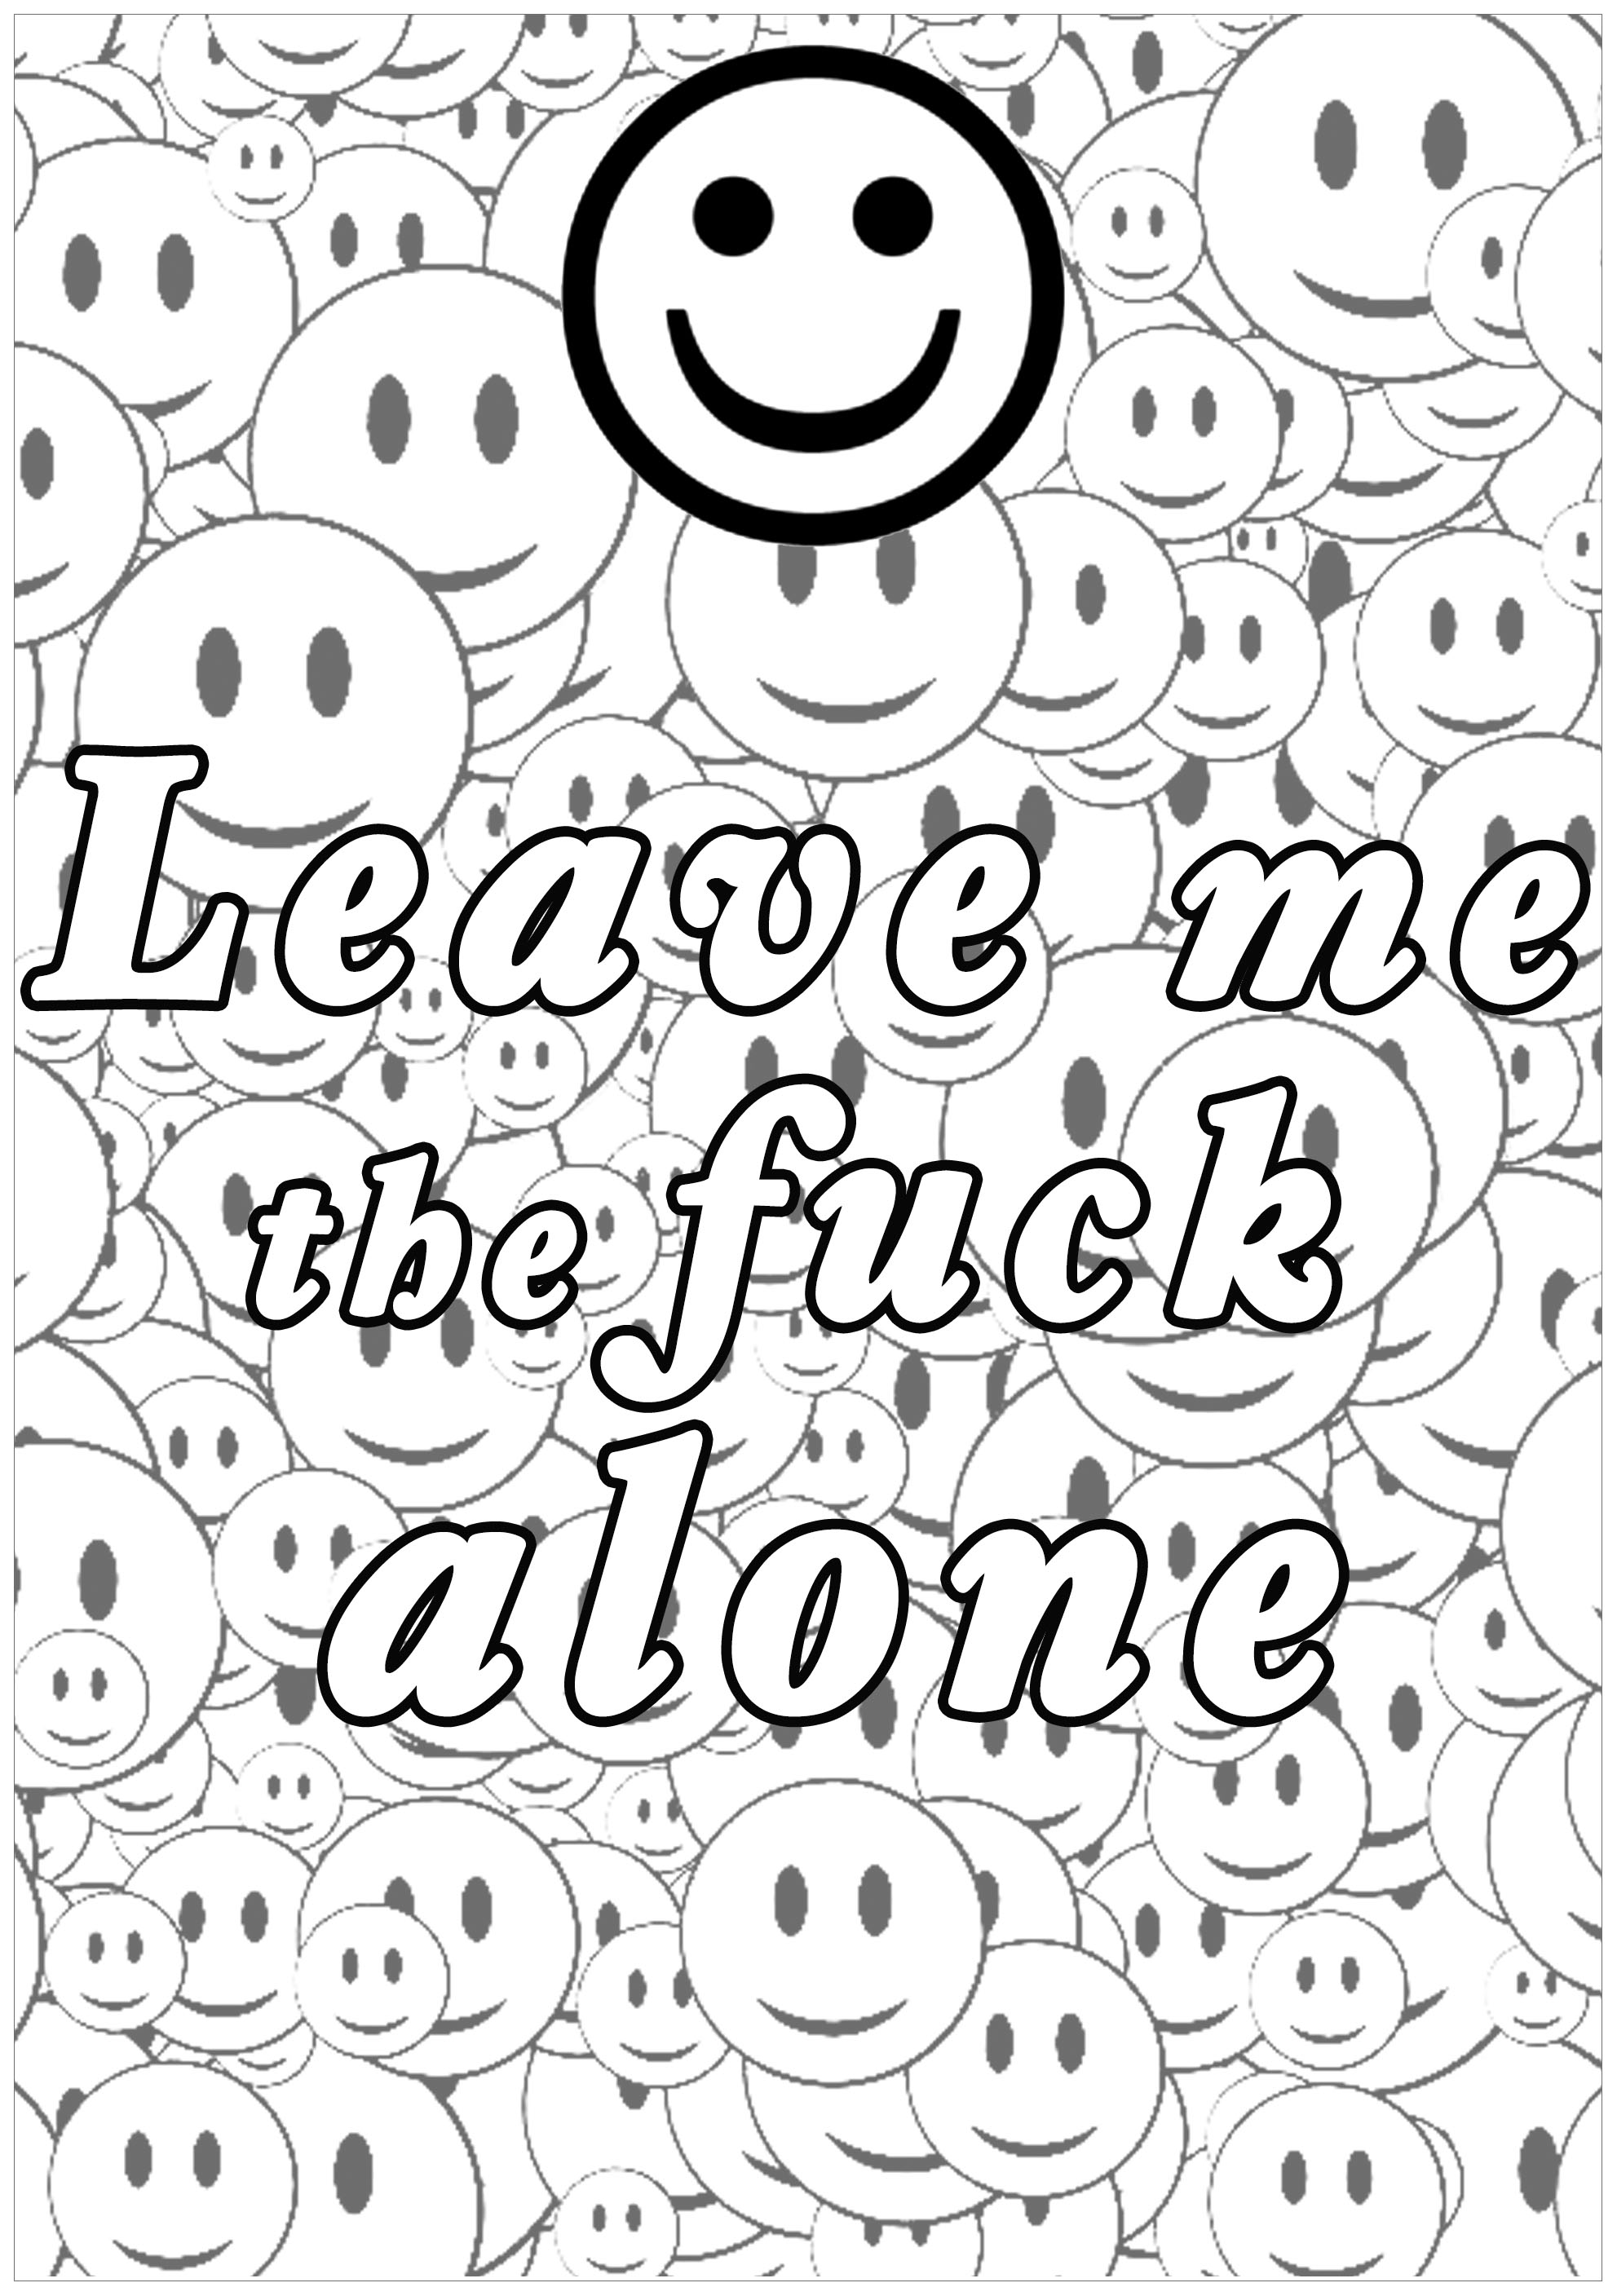 Leave me the fuck alone : Swear word coloring page with smiling smileys